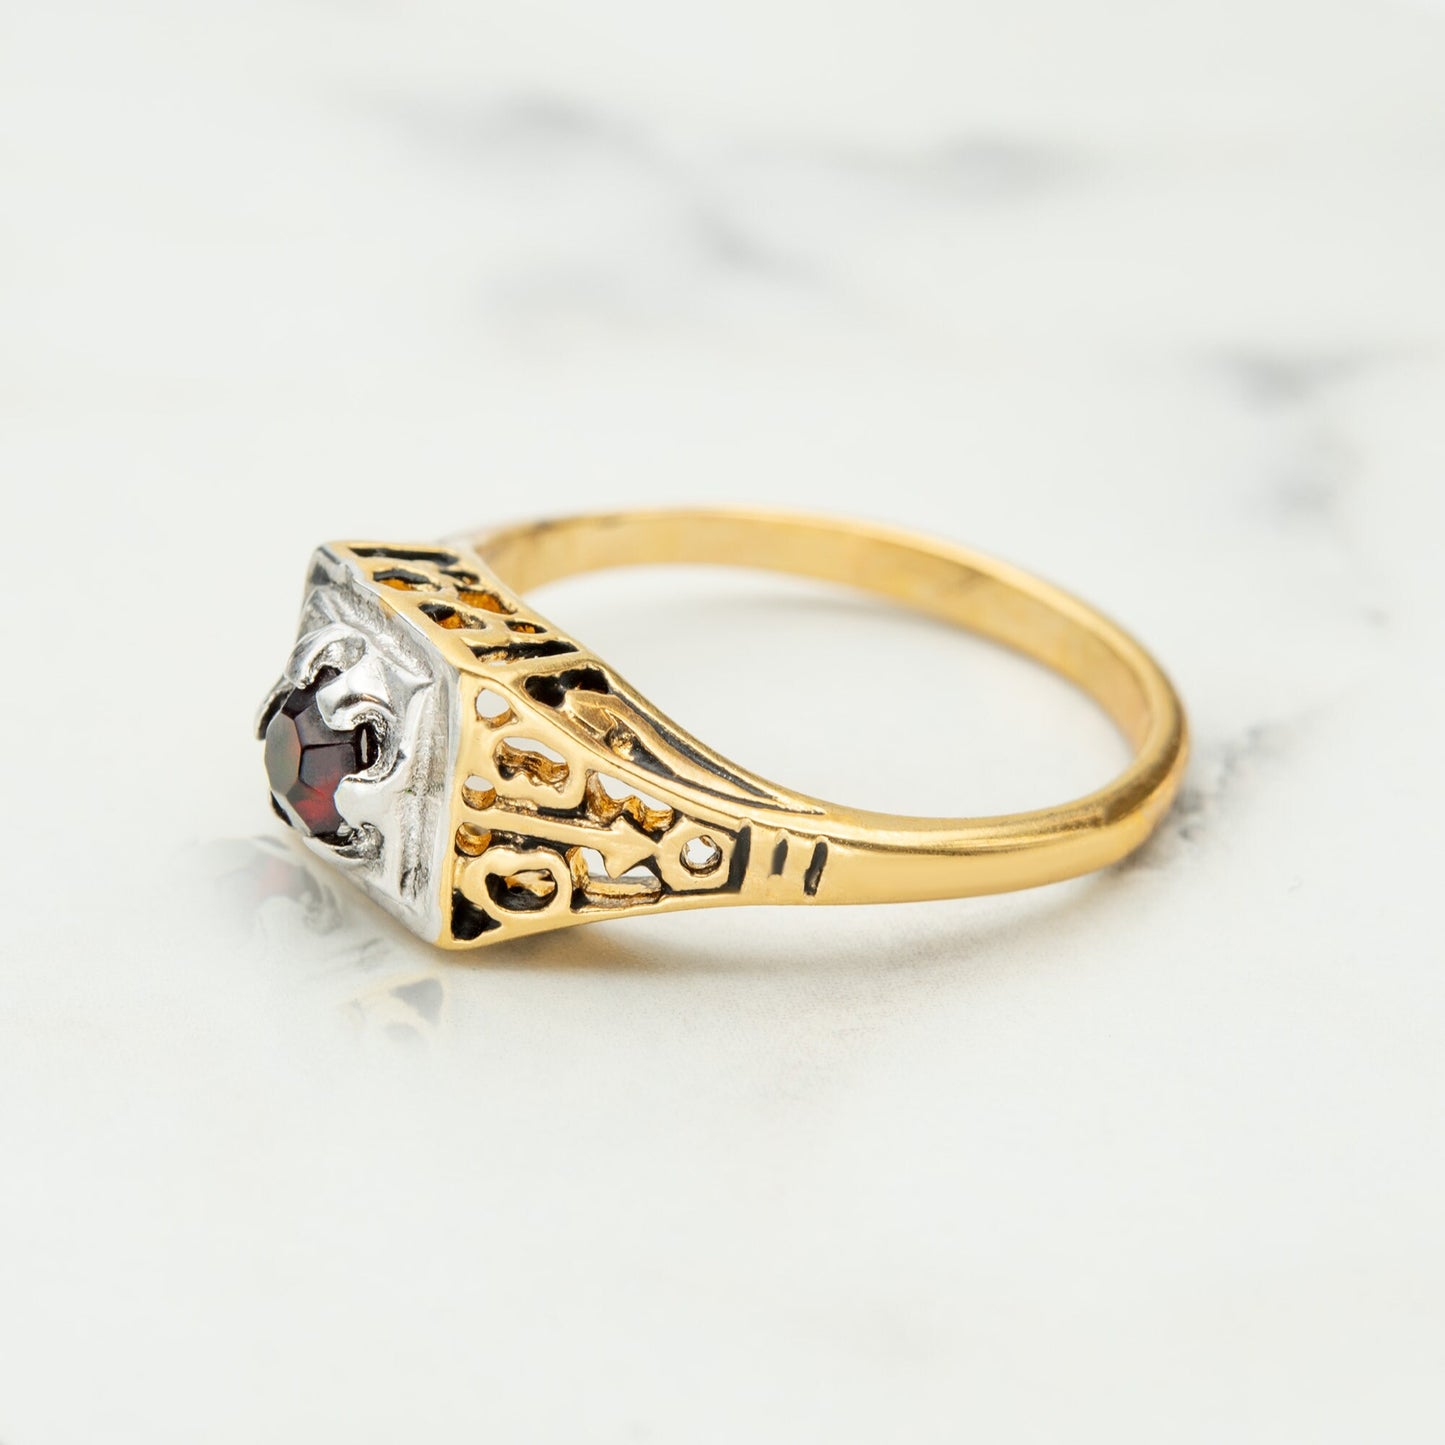 Vintage Garnet Women's Ring 18k Gold Electroplated Antique Rings Dainty Layering - Limited Stock - Never Worn R1258